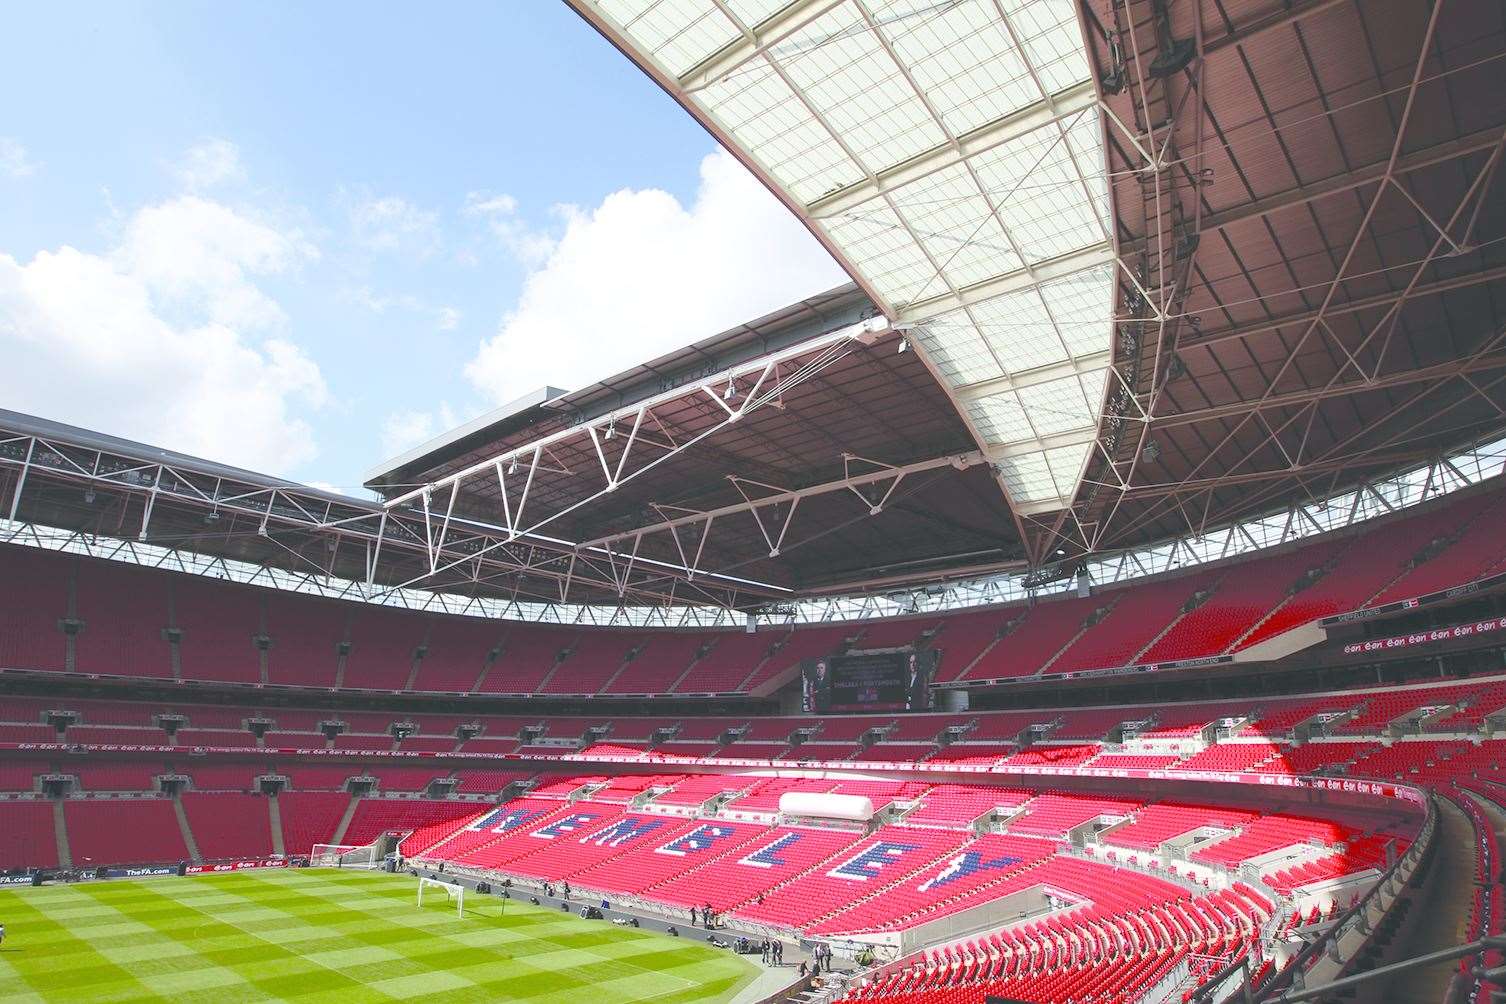 Wembley stadium will host the FA Vase final in May.